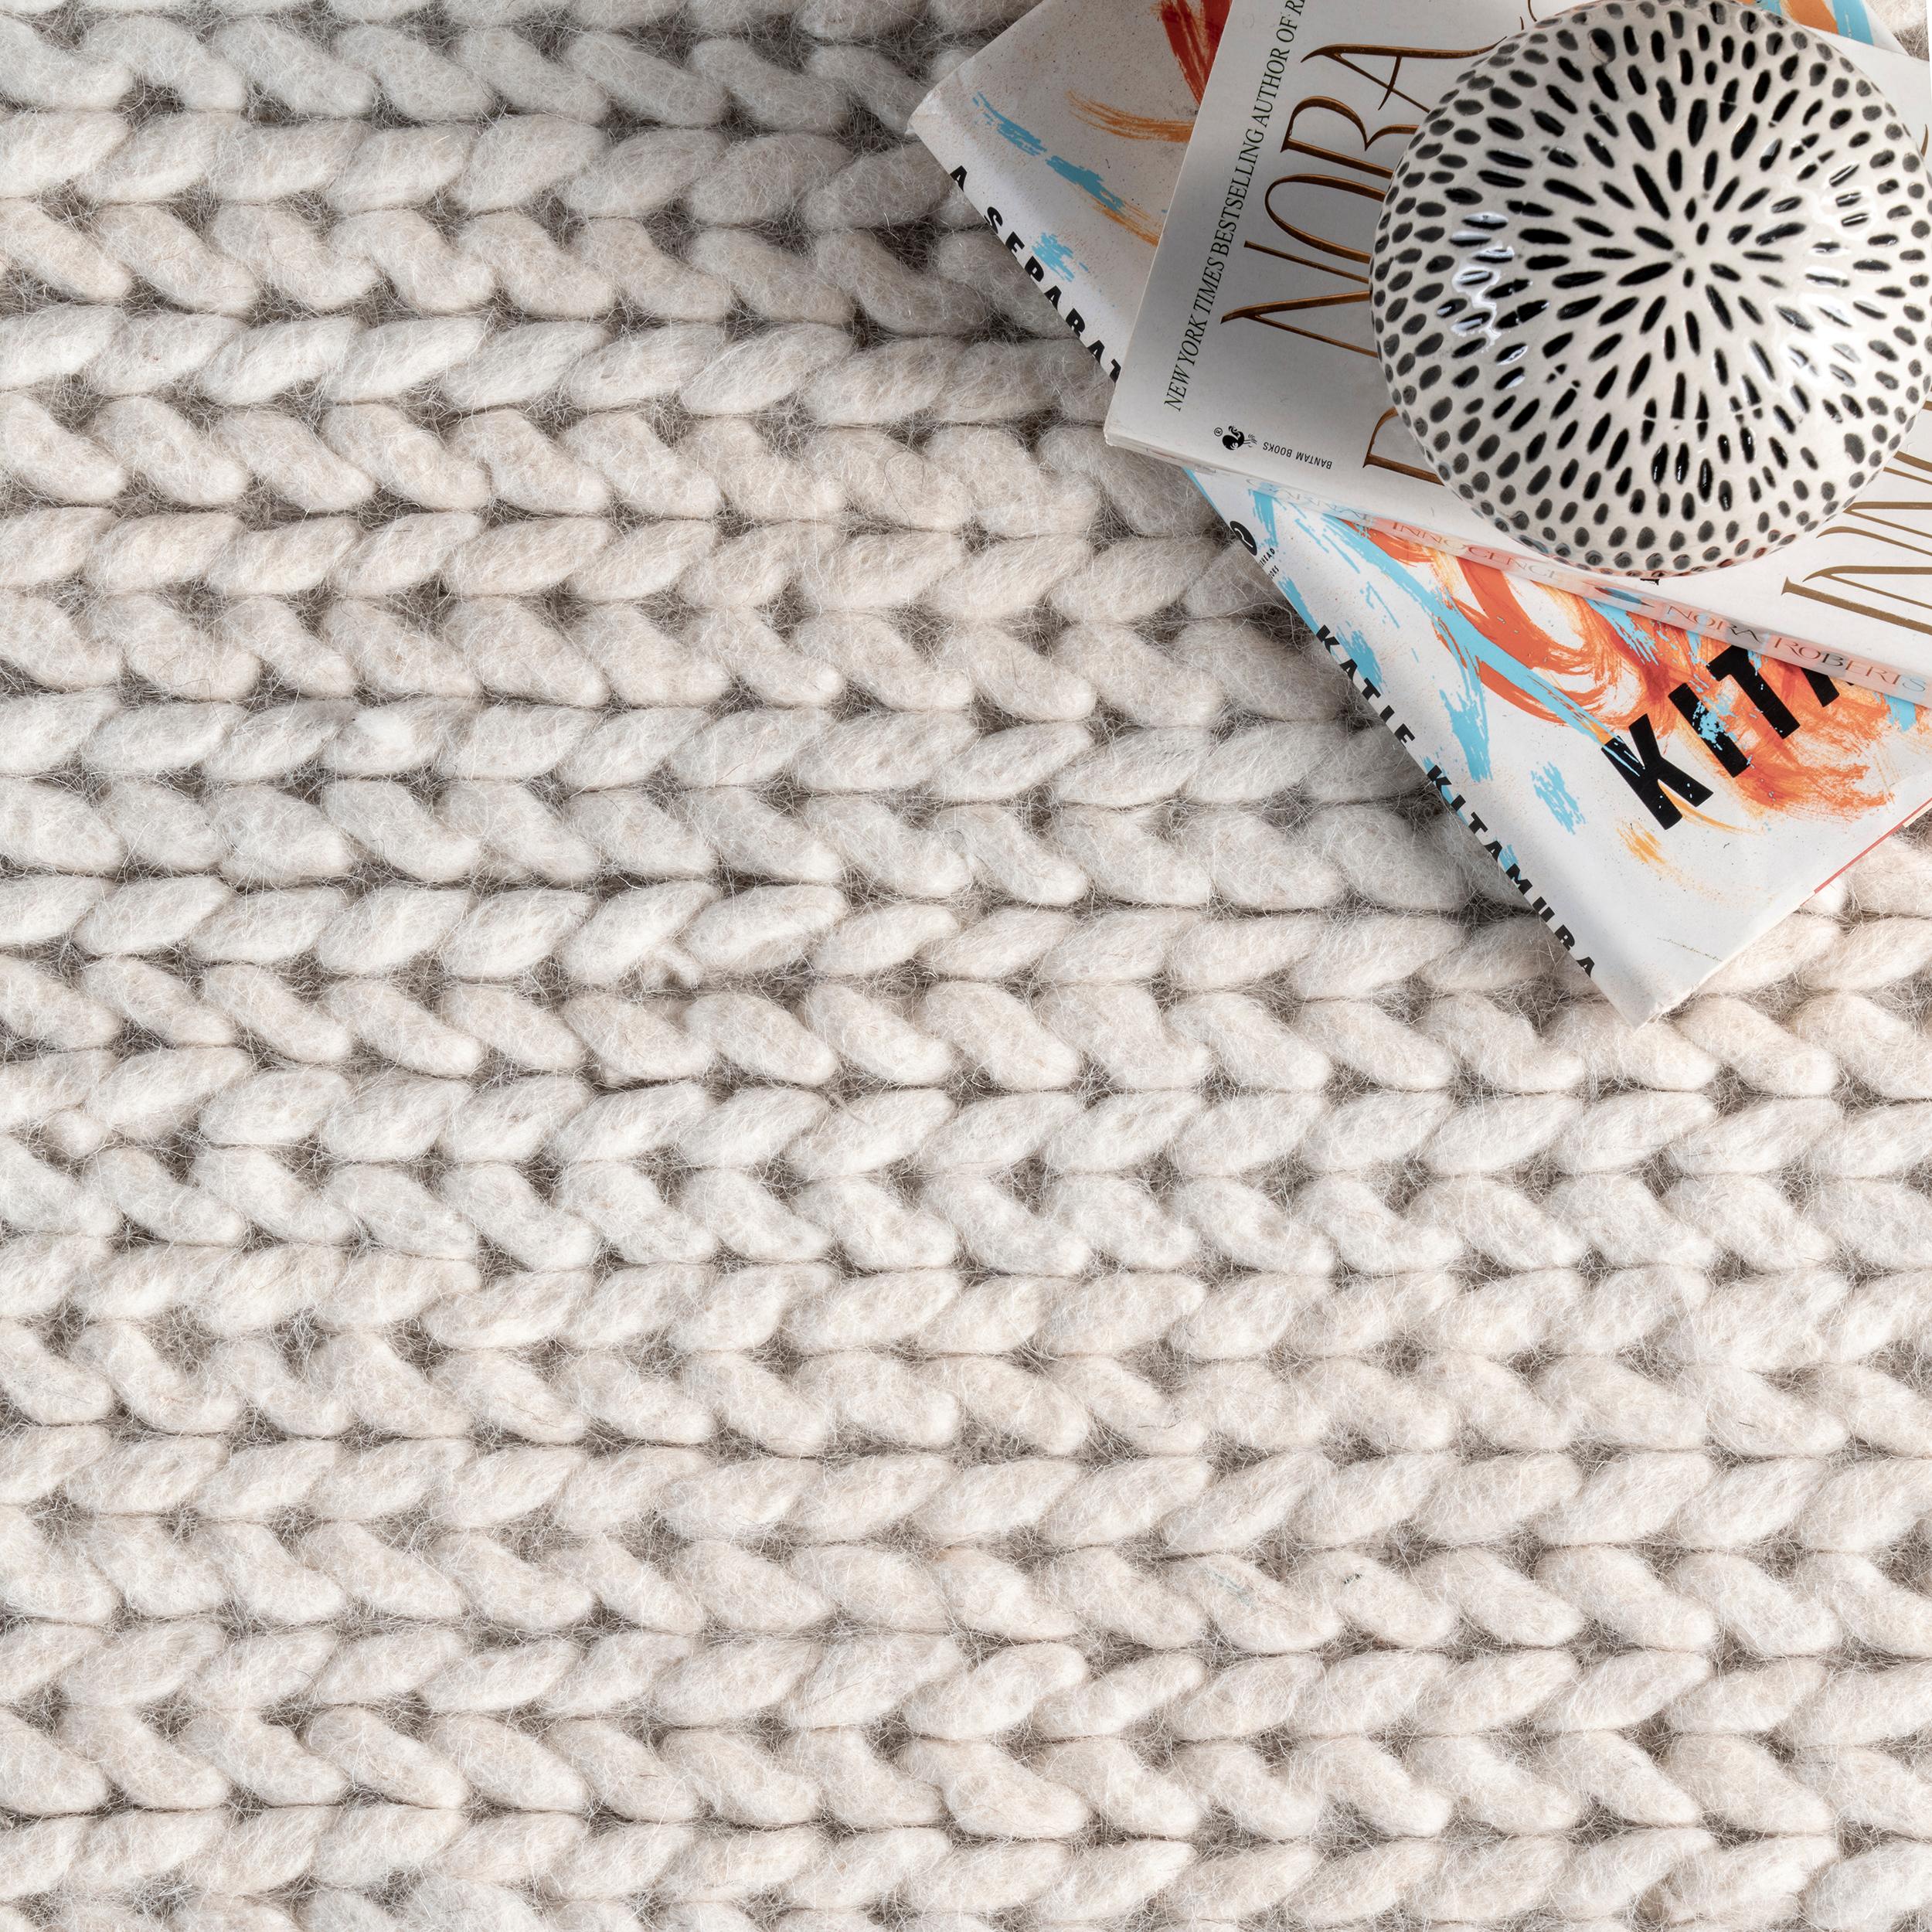 Handmade Braided Wool Off-white Soft Area Rugs – Modern Rugs and Decor